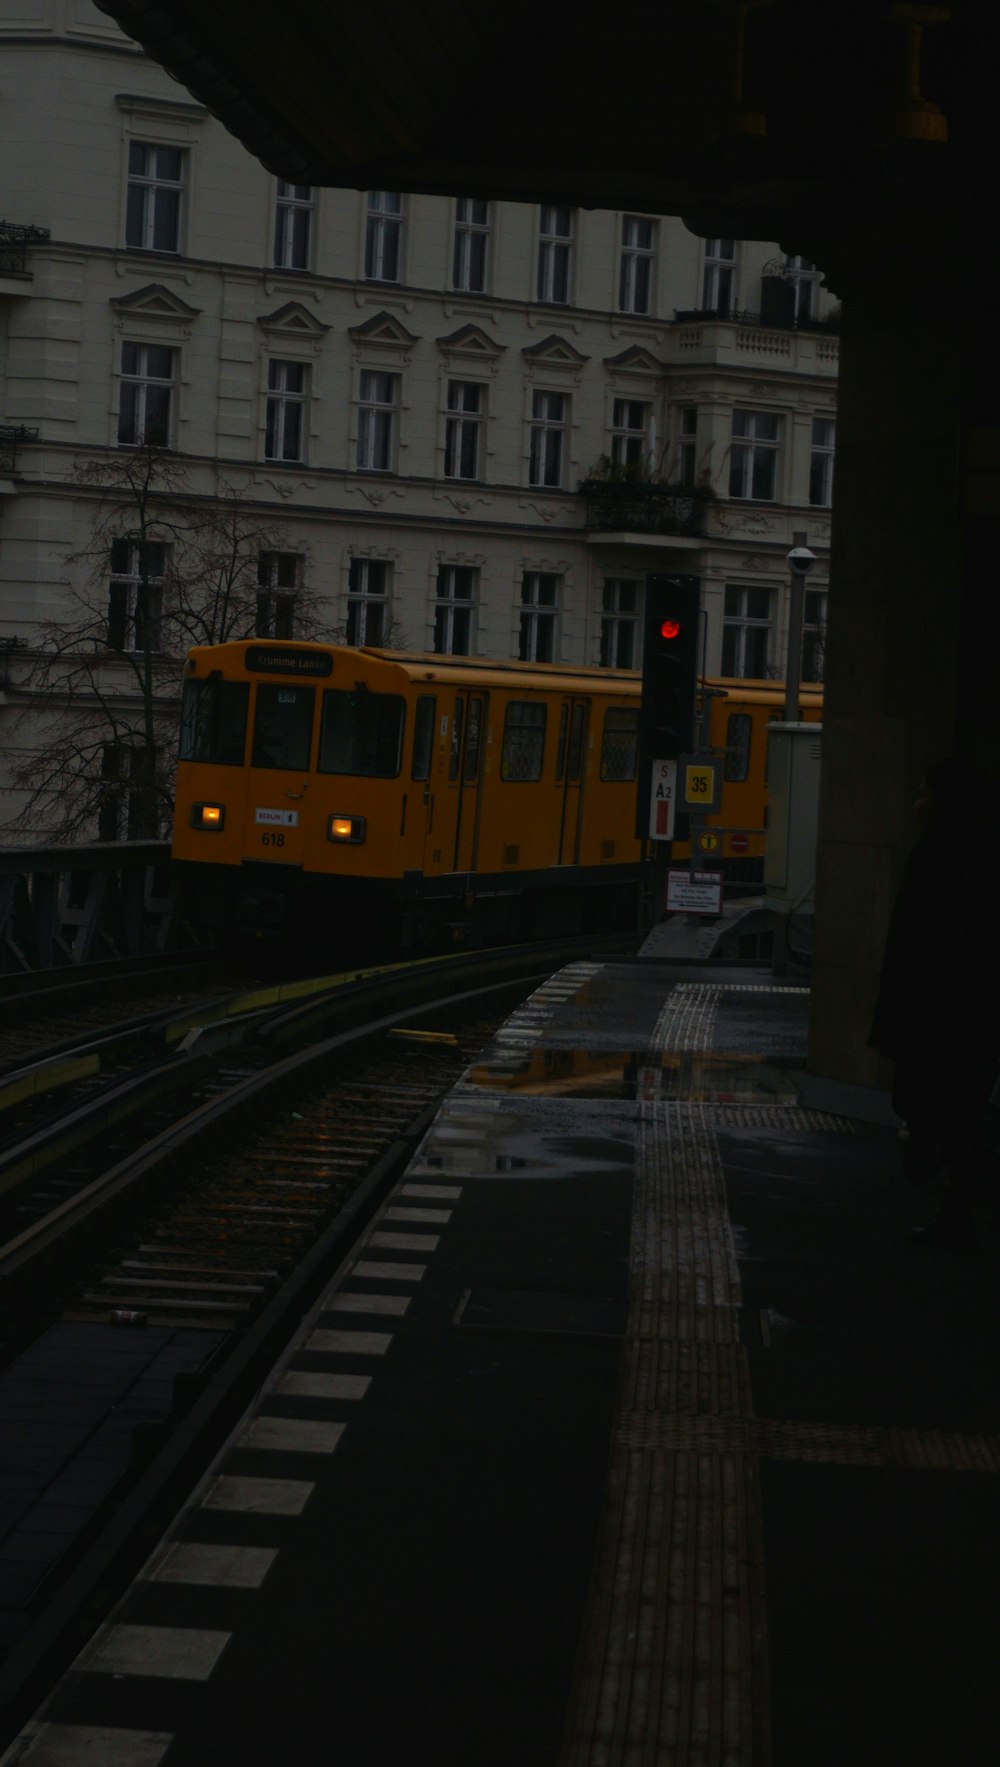 a yellow train traveling down train tracks next to a tall building